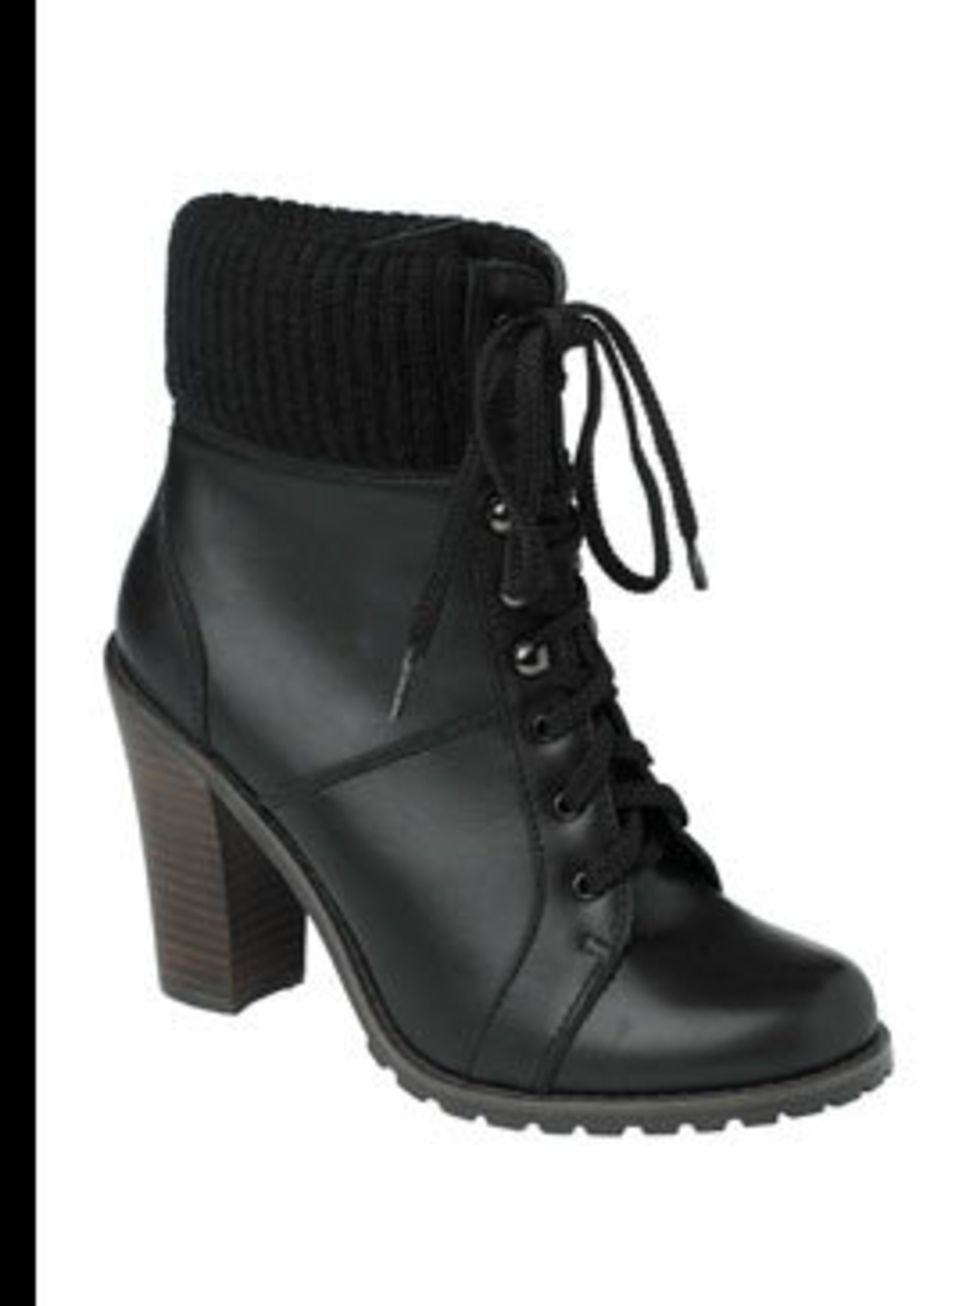 <p>Black leather chunky ankle boot, £50, by <a href="www.newlook.co.uk">New look</a></p>